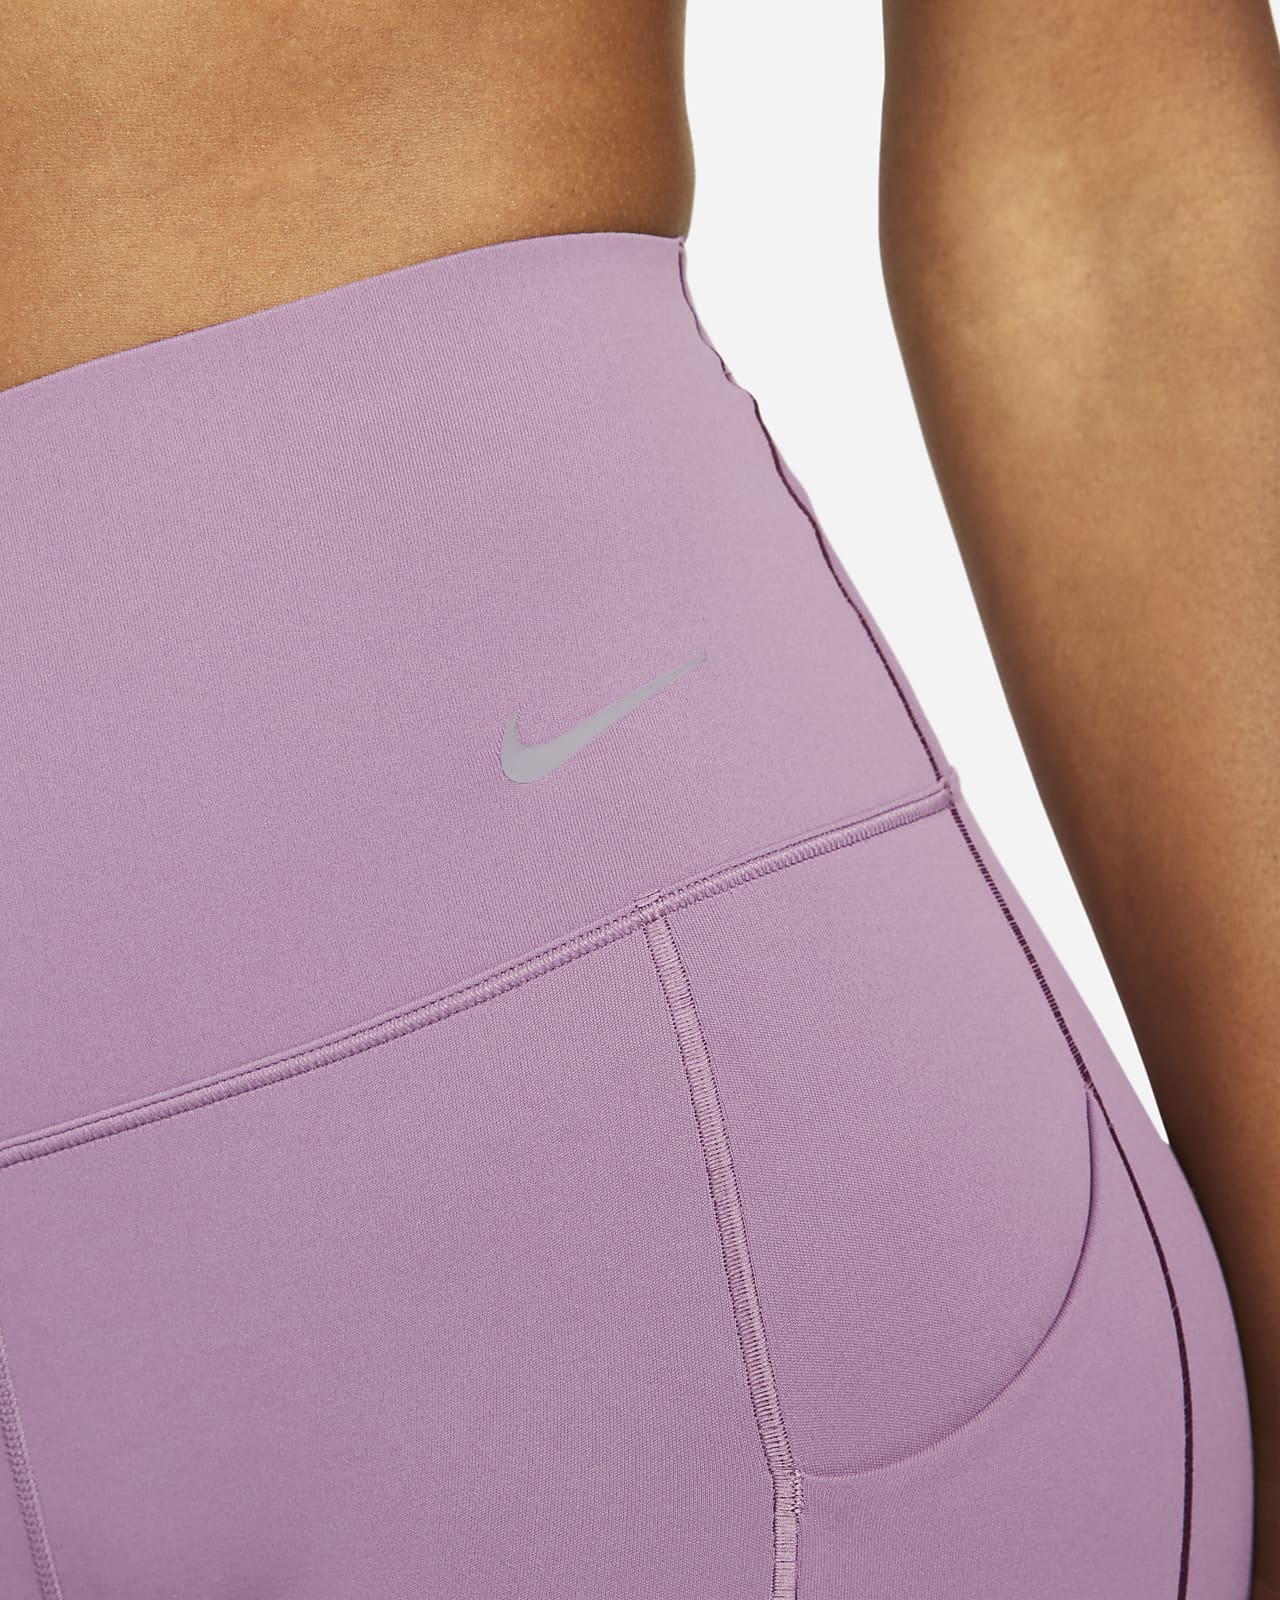 Nike Universa Women's Medium-Support High-Waisted 7/8 Leggings with Pockets.